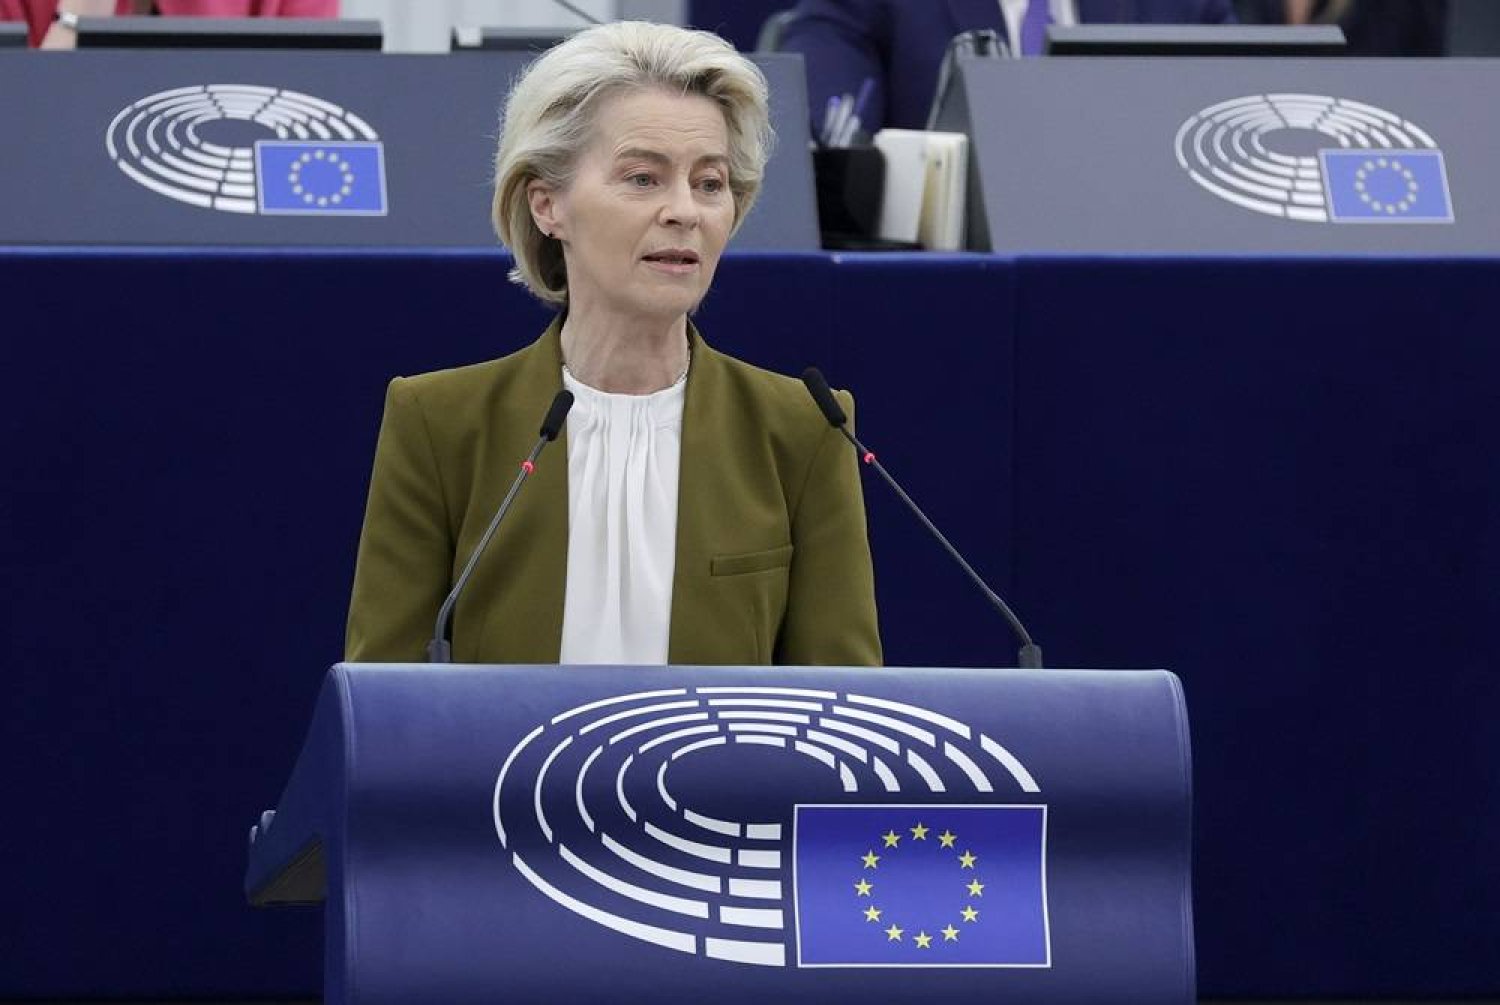 European Commission President Ursula von der Leyen delivers a speech during a formal sitting on the 20th anniversary of the 2004 EU Enlargement at the European Parliament in Strasbourg, France, 24 April 2024. (EPA)